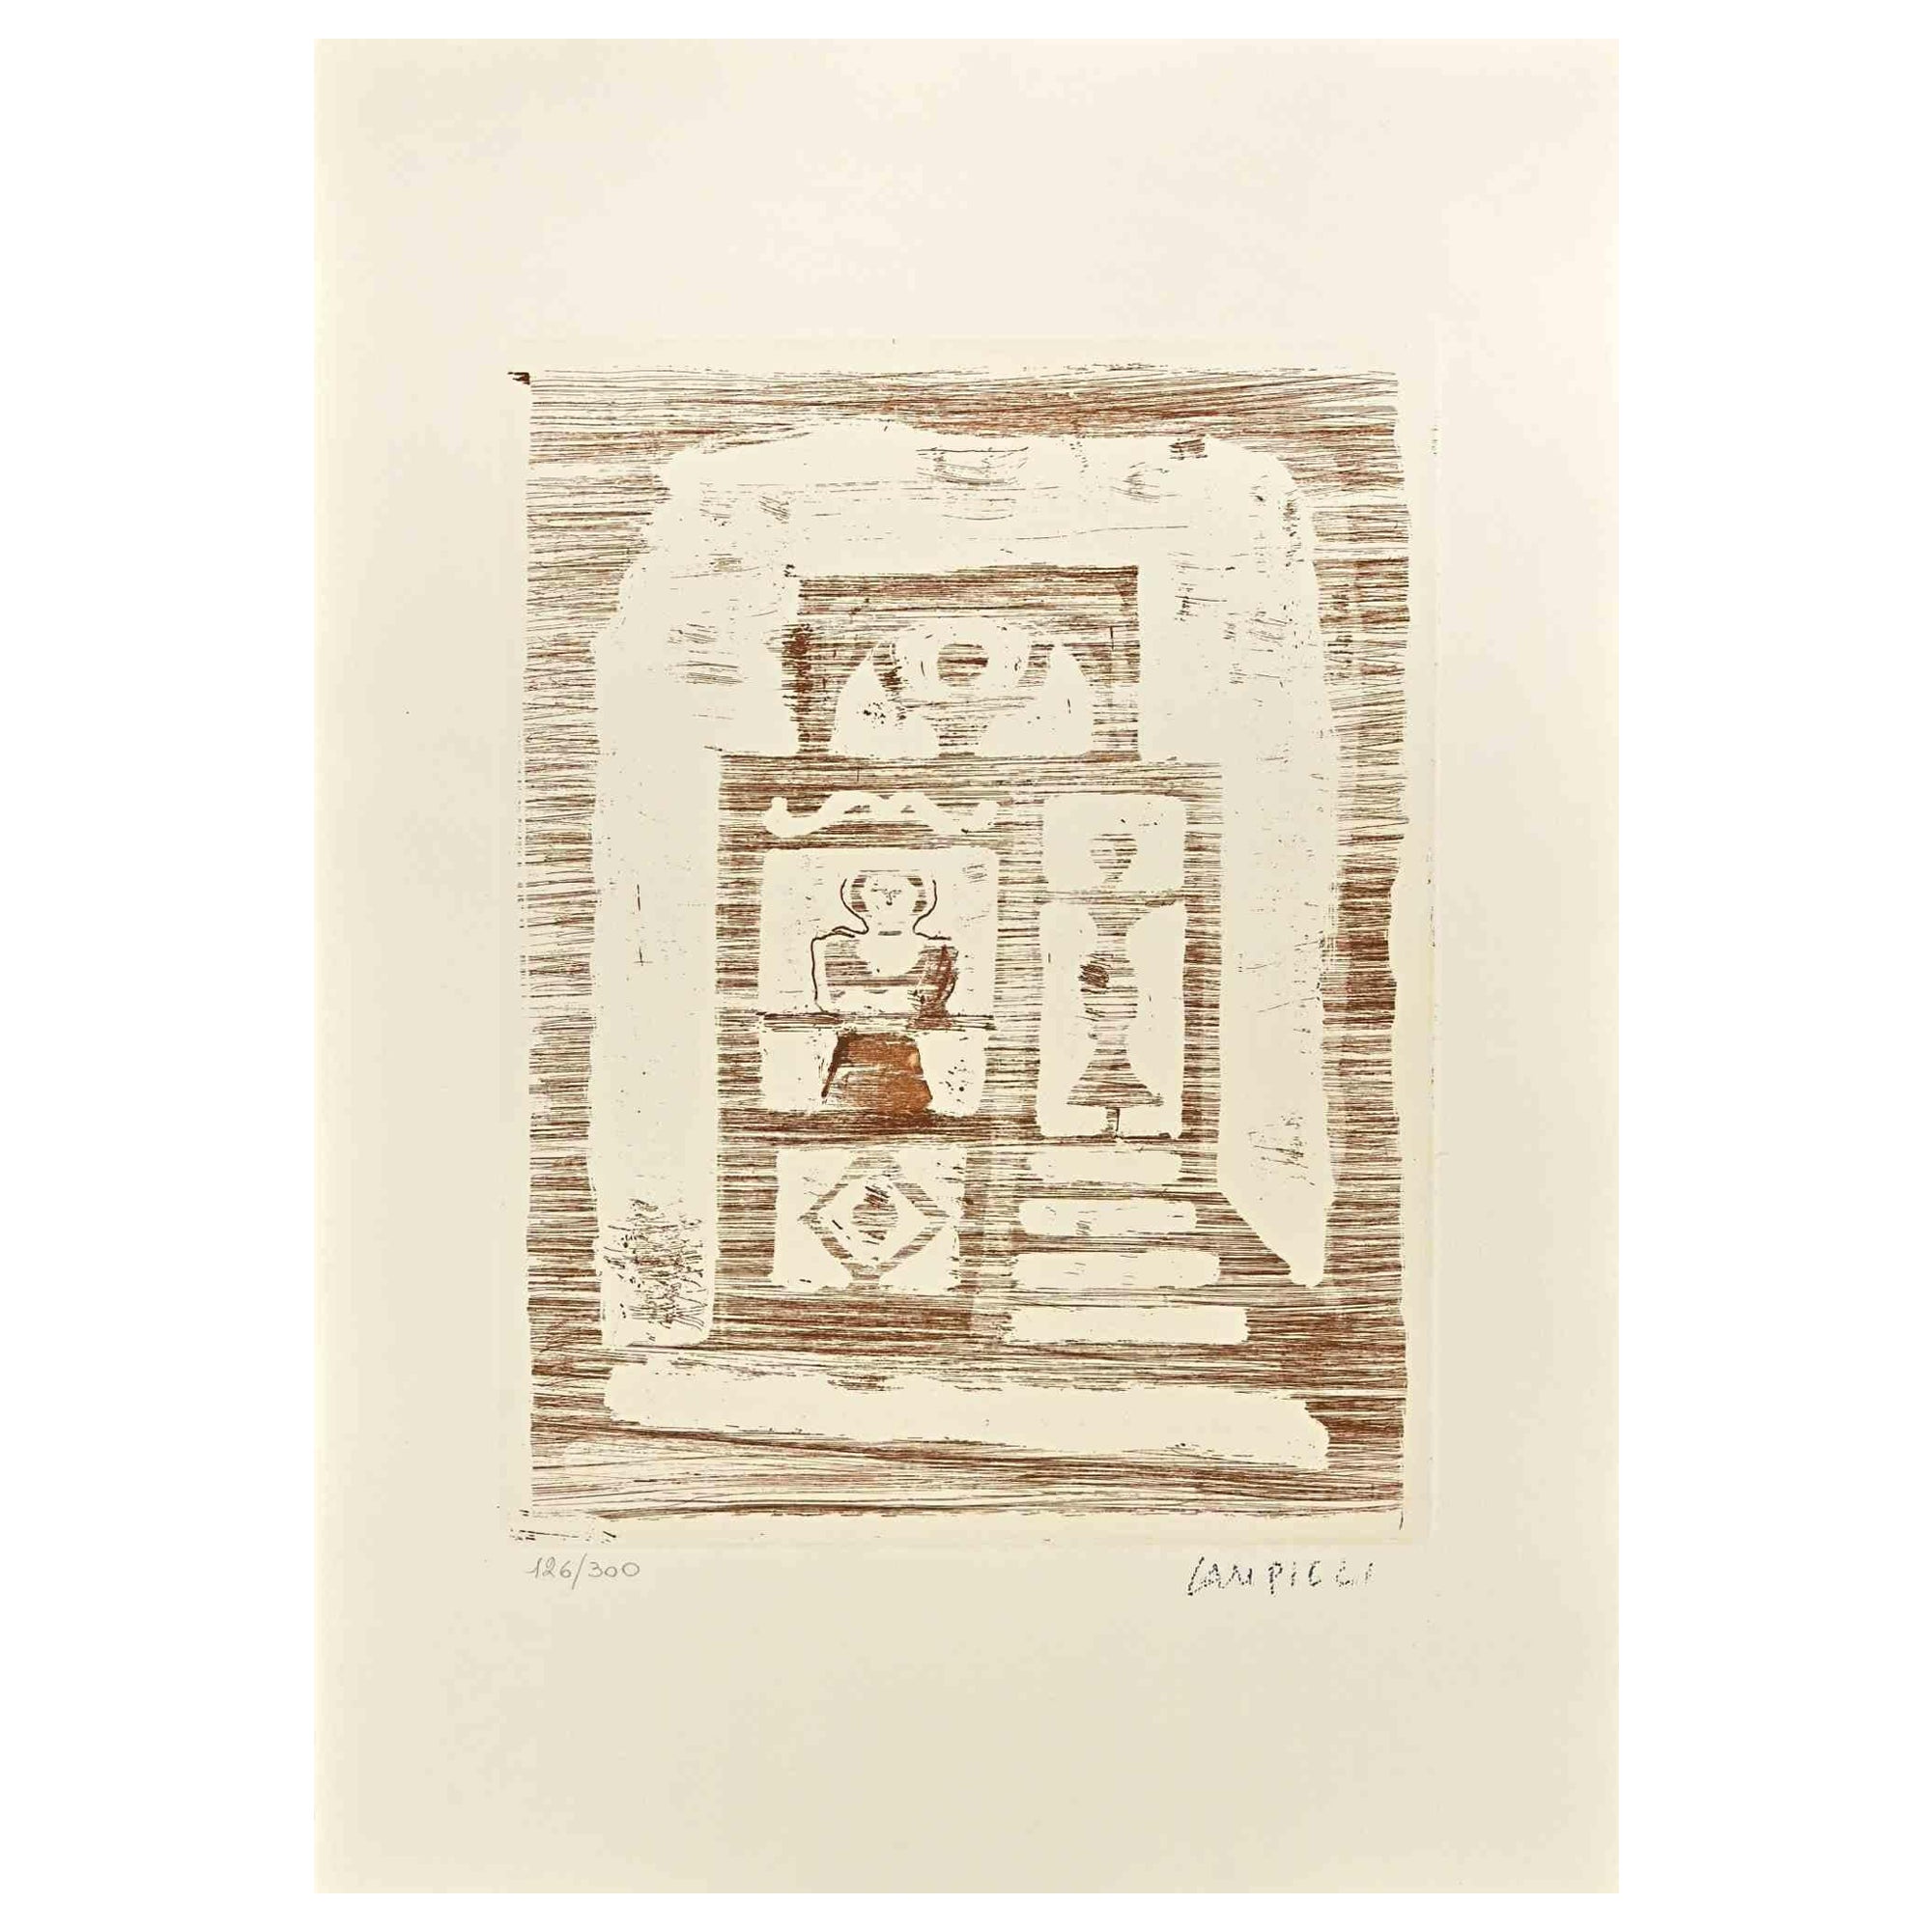 The House of Women  is an original print realized by Massimo Campigli in the 1970/1971s.

Etching on paper.

This artwork it is part of a series of works created in the last period of the artist and printed at the turn of the year of his death,